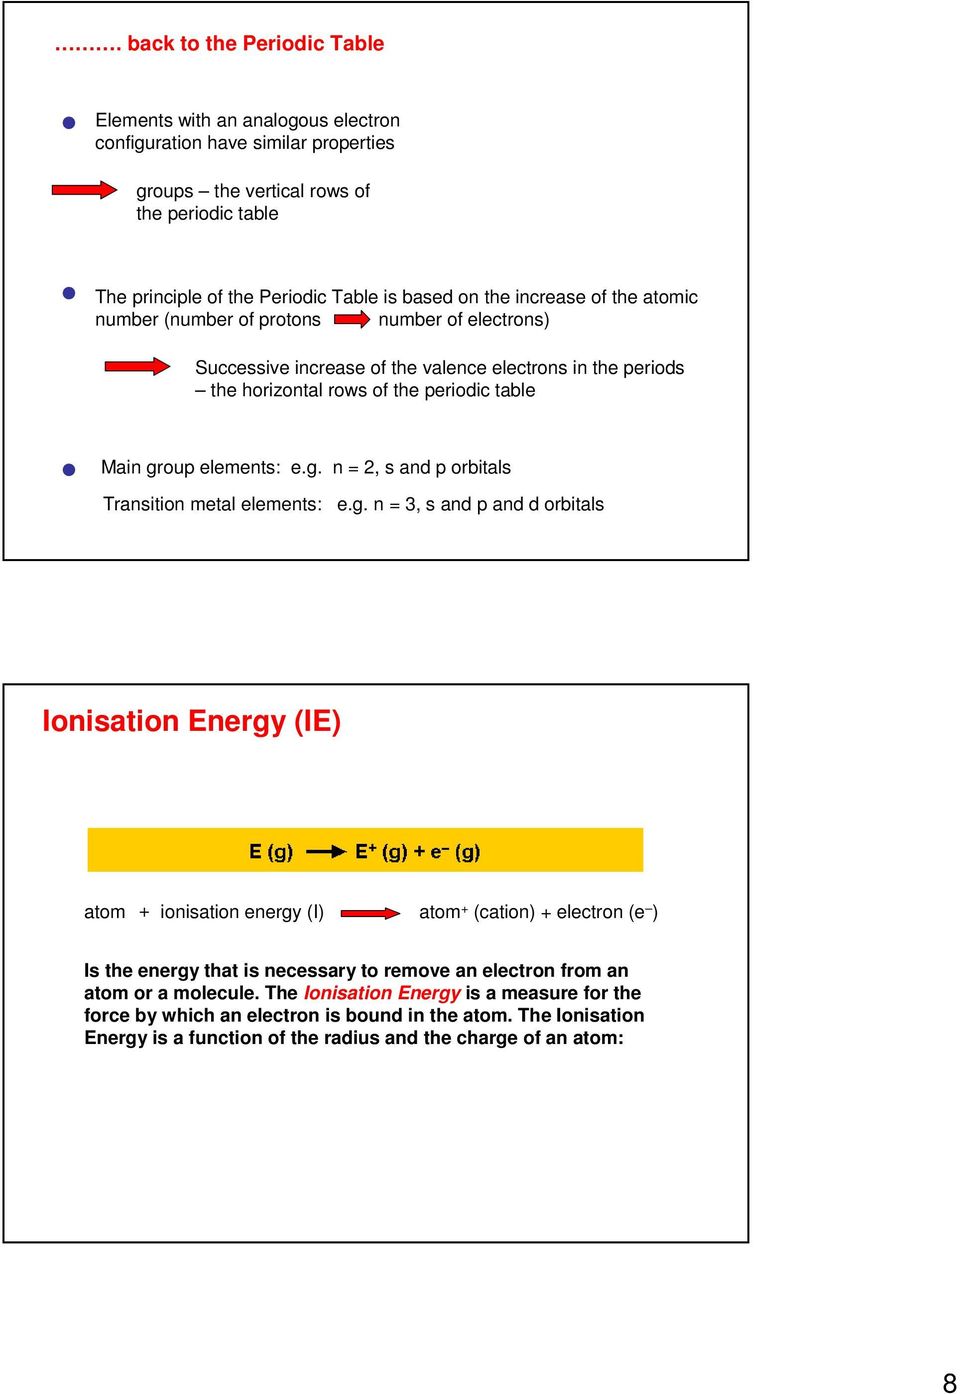 g. n = 2, s and p orbitals Transition metal elements: e.g. n = 3, s and p and d orbitals Ionisation Energy (IE) atom + ionisation energy (I) atom + (cation) + electron (e ) Is the energy that is necessary to remove an electron from an atom or a molecule.